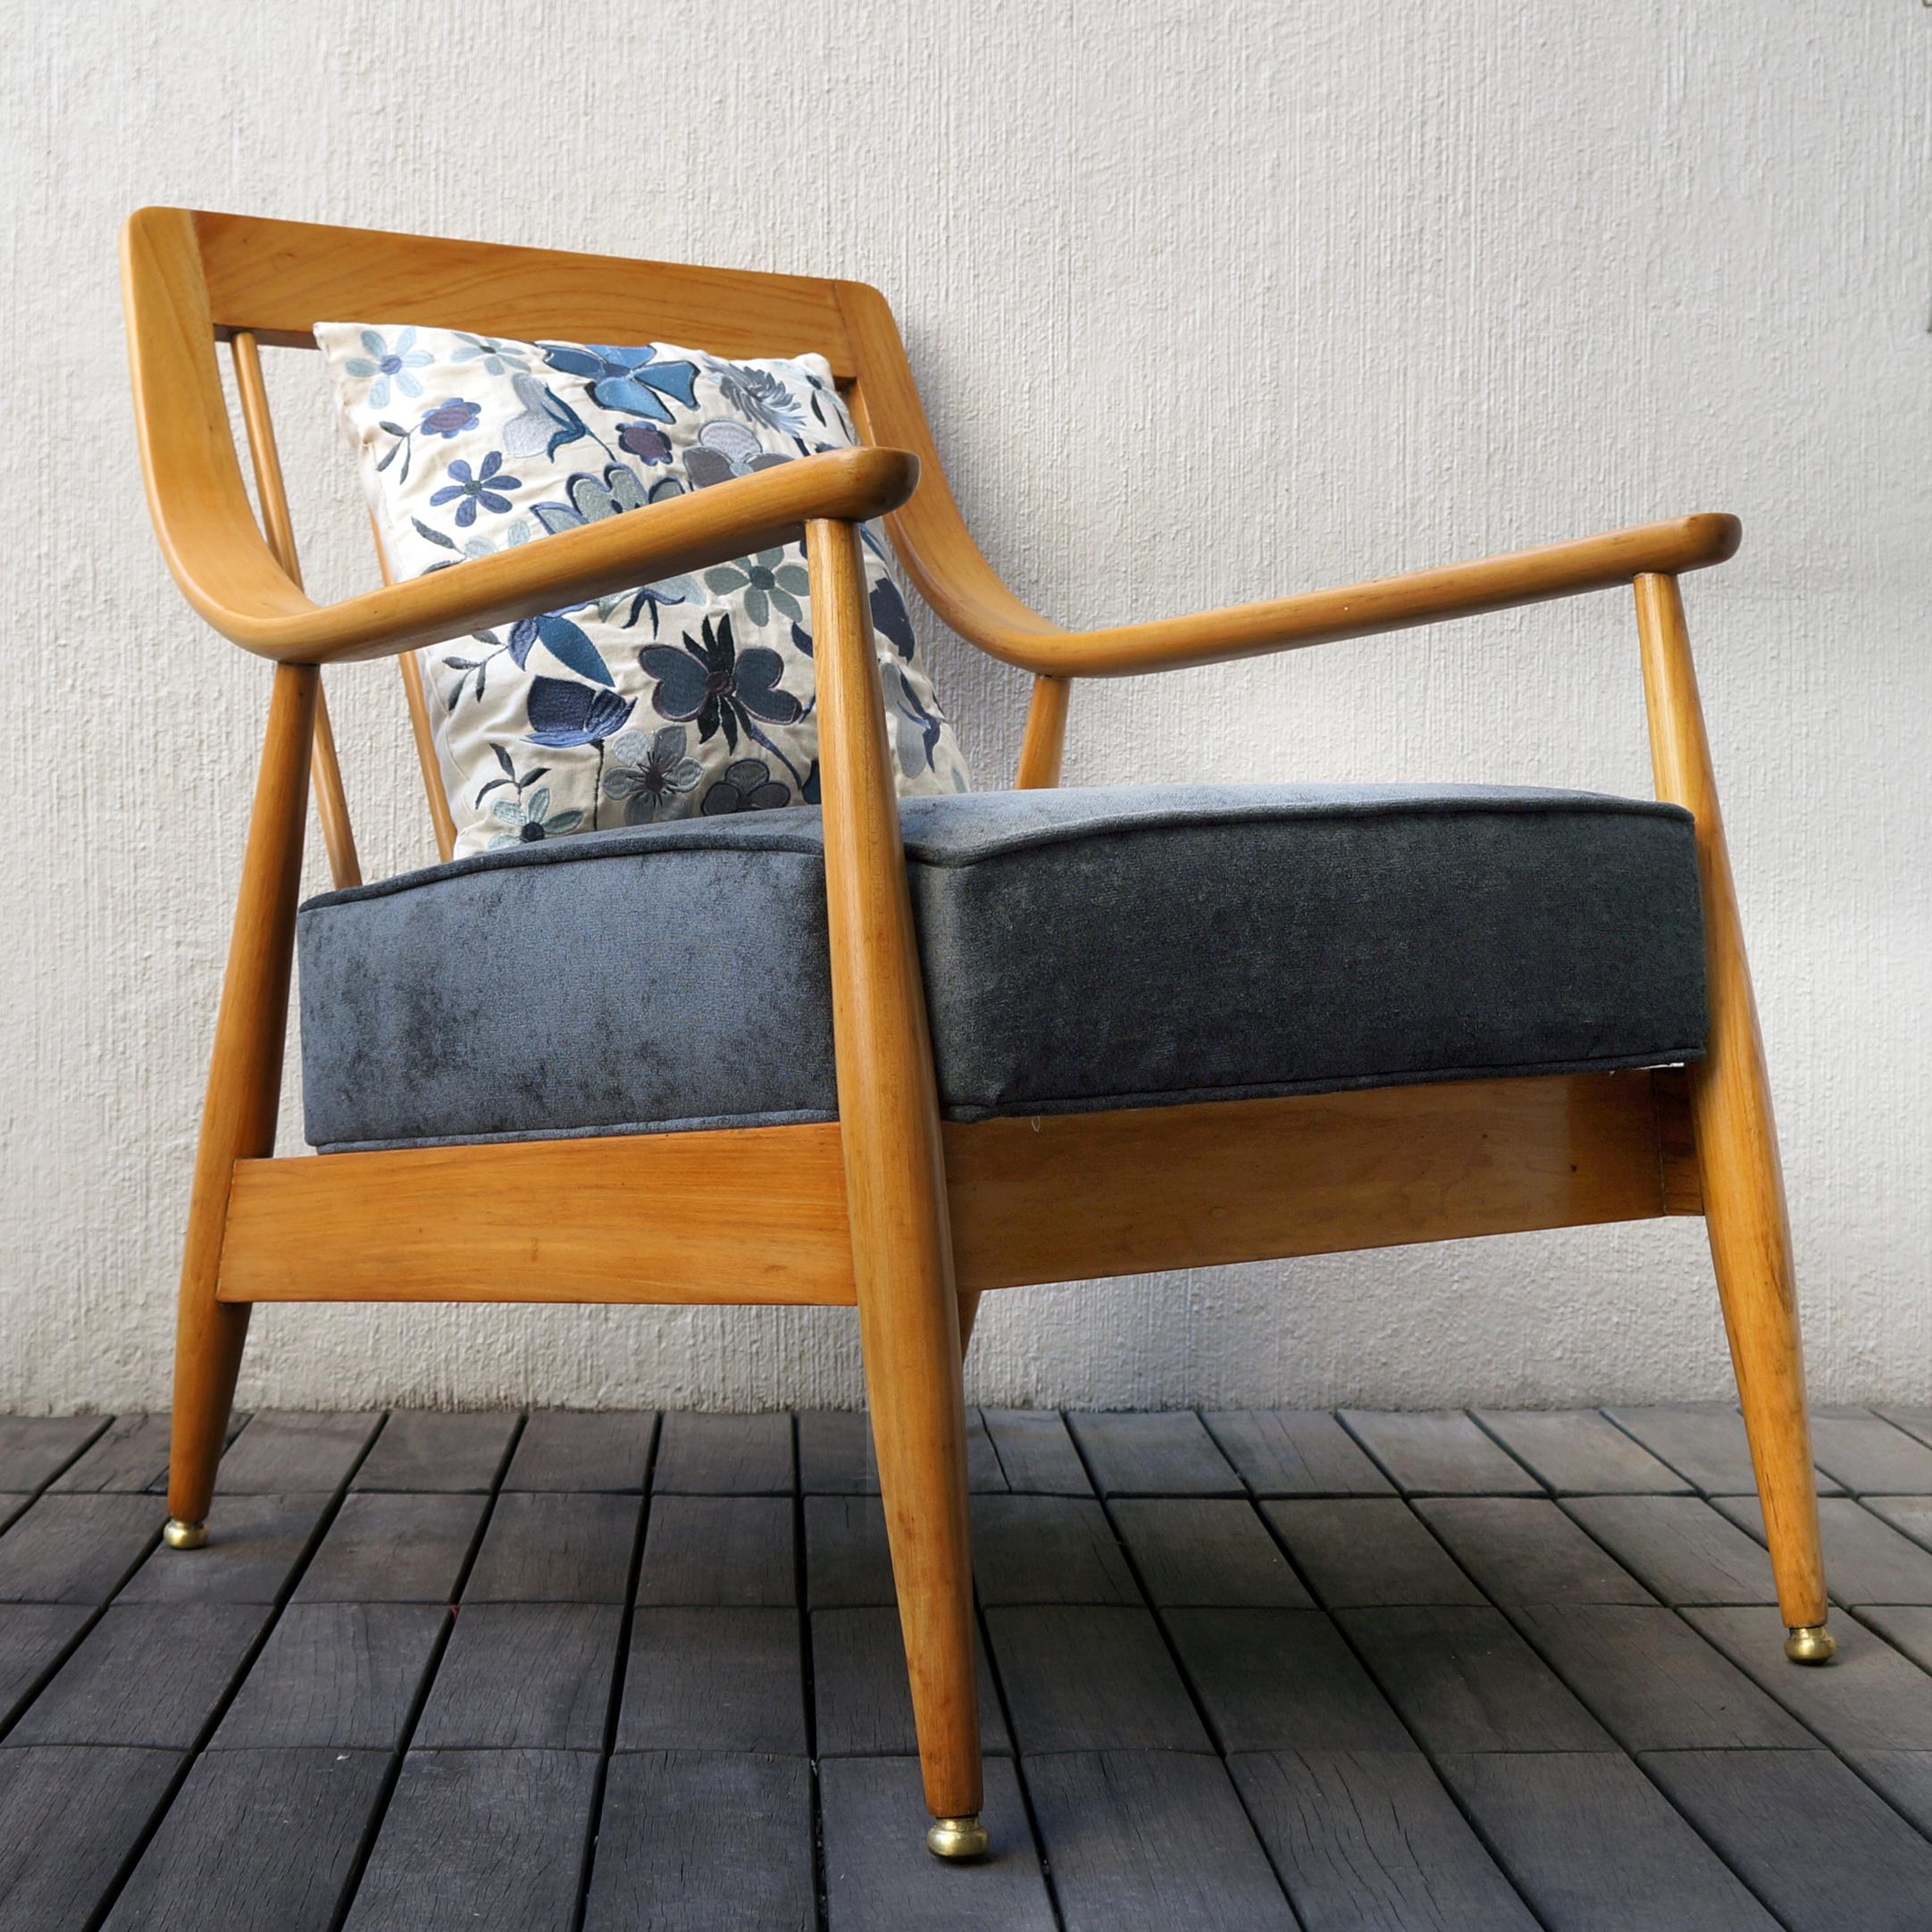 Fabric Mexican Midcentury Lounge Chair, “Malinche